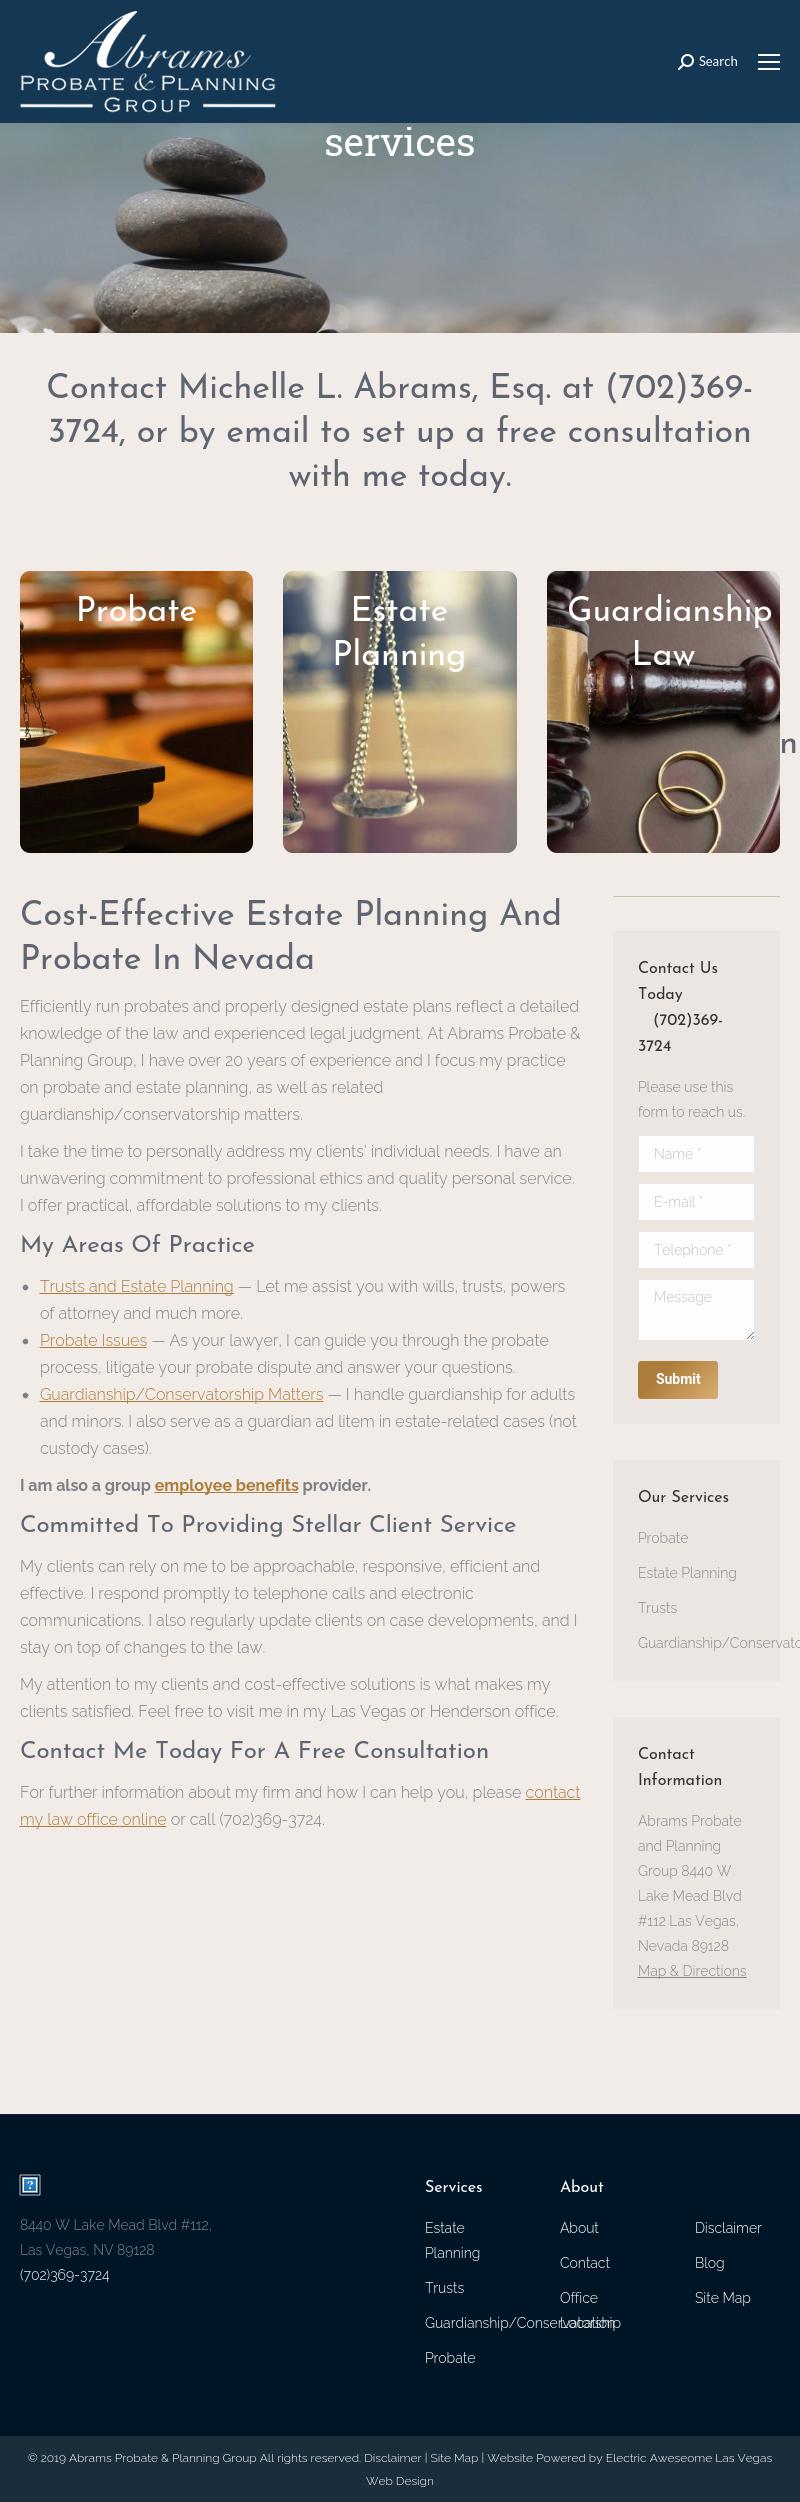 Abrams Probate and Planning Group - Las Vegas NV Lawyers